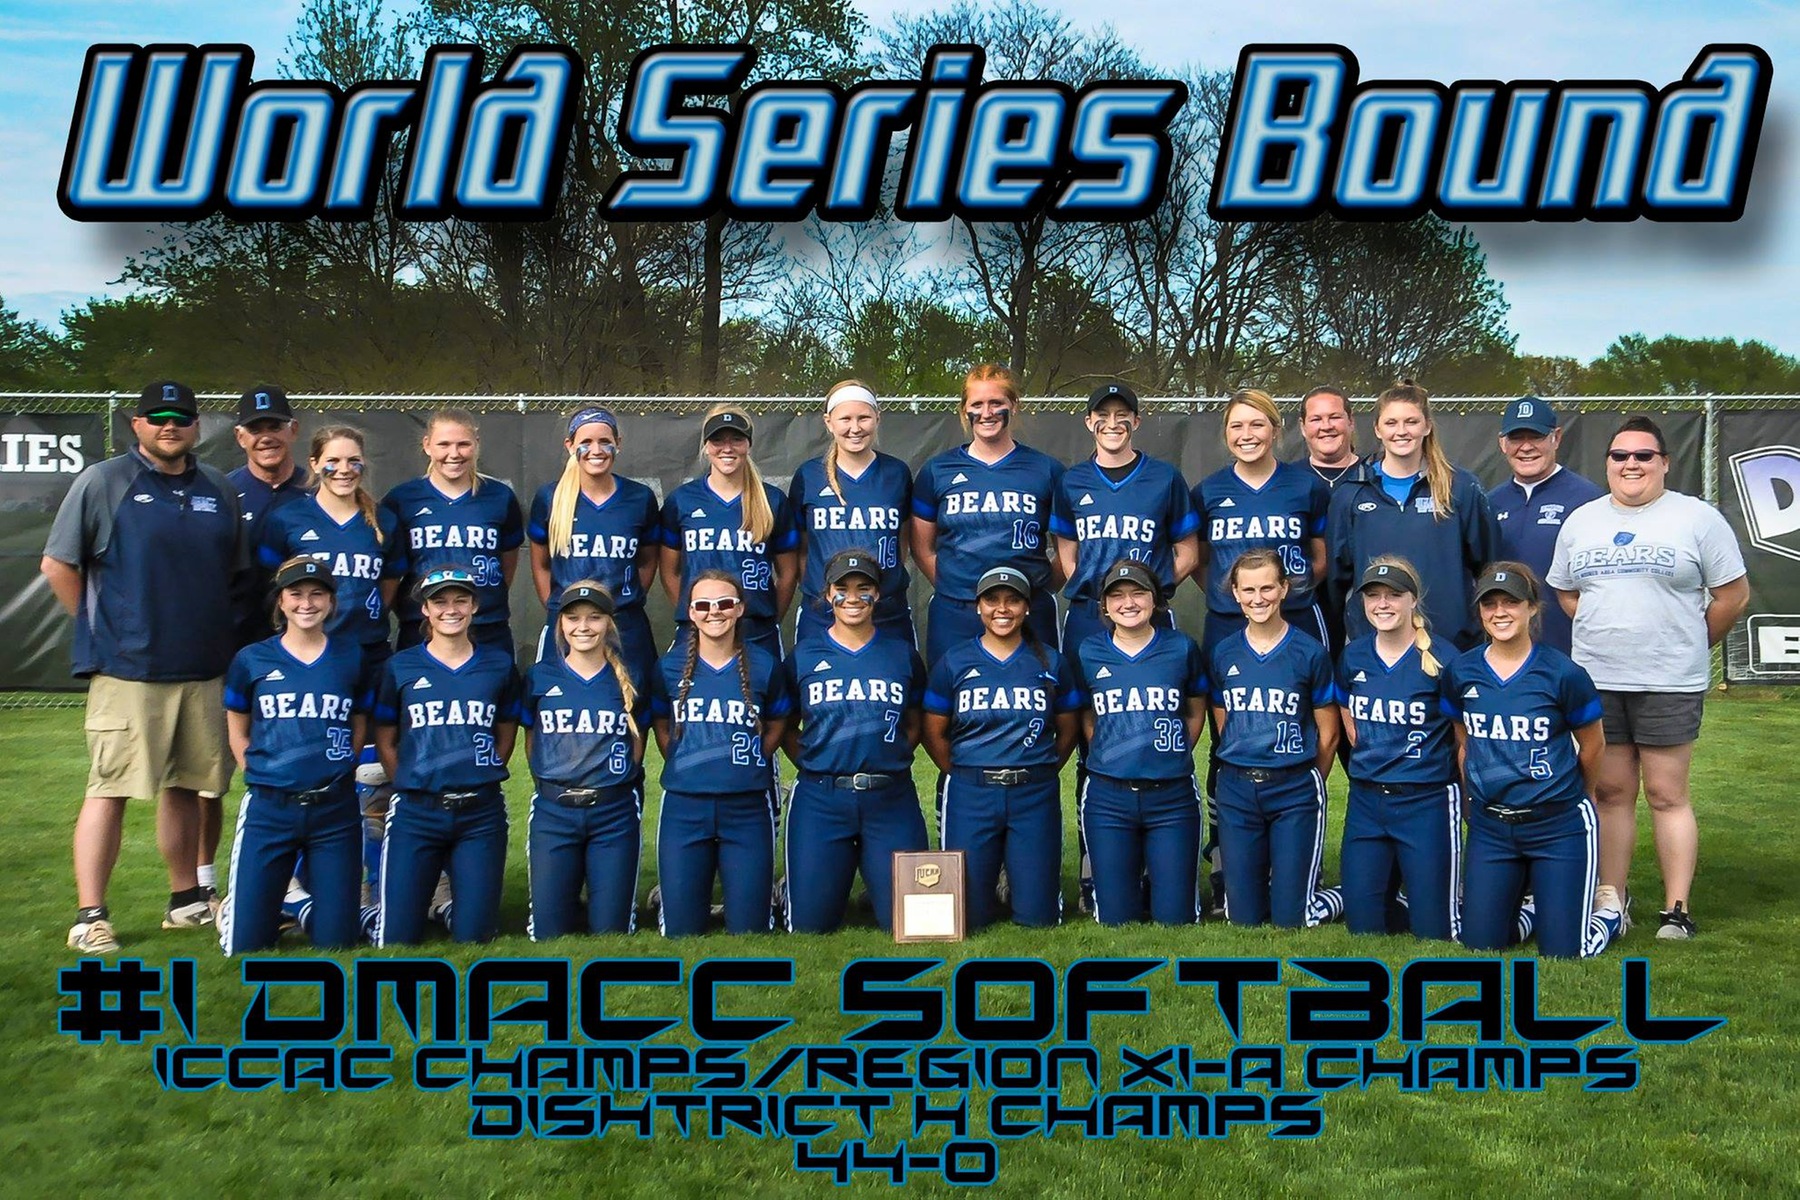 DMACC softball team advances to national tournament after sweeping doubleheader from Dawson